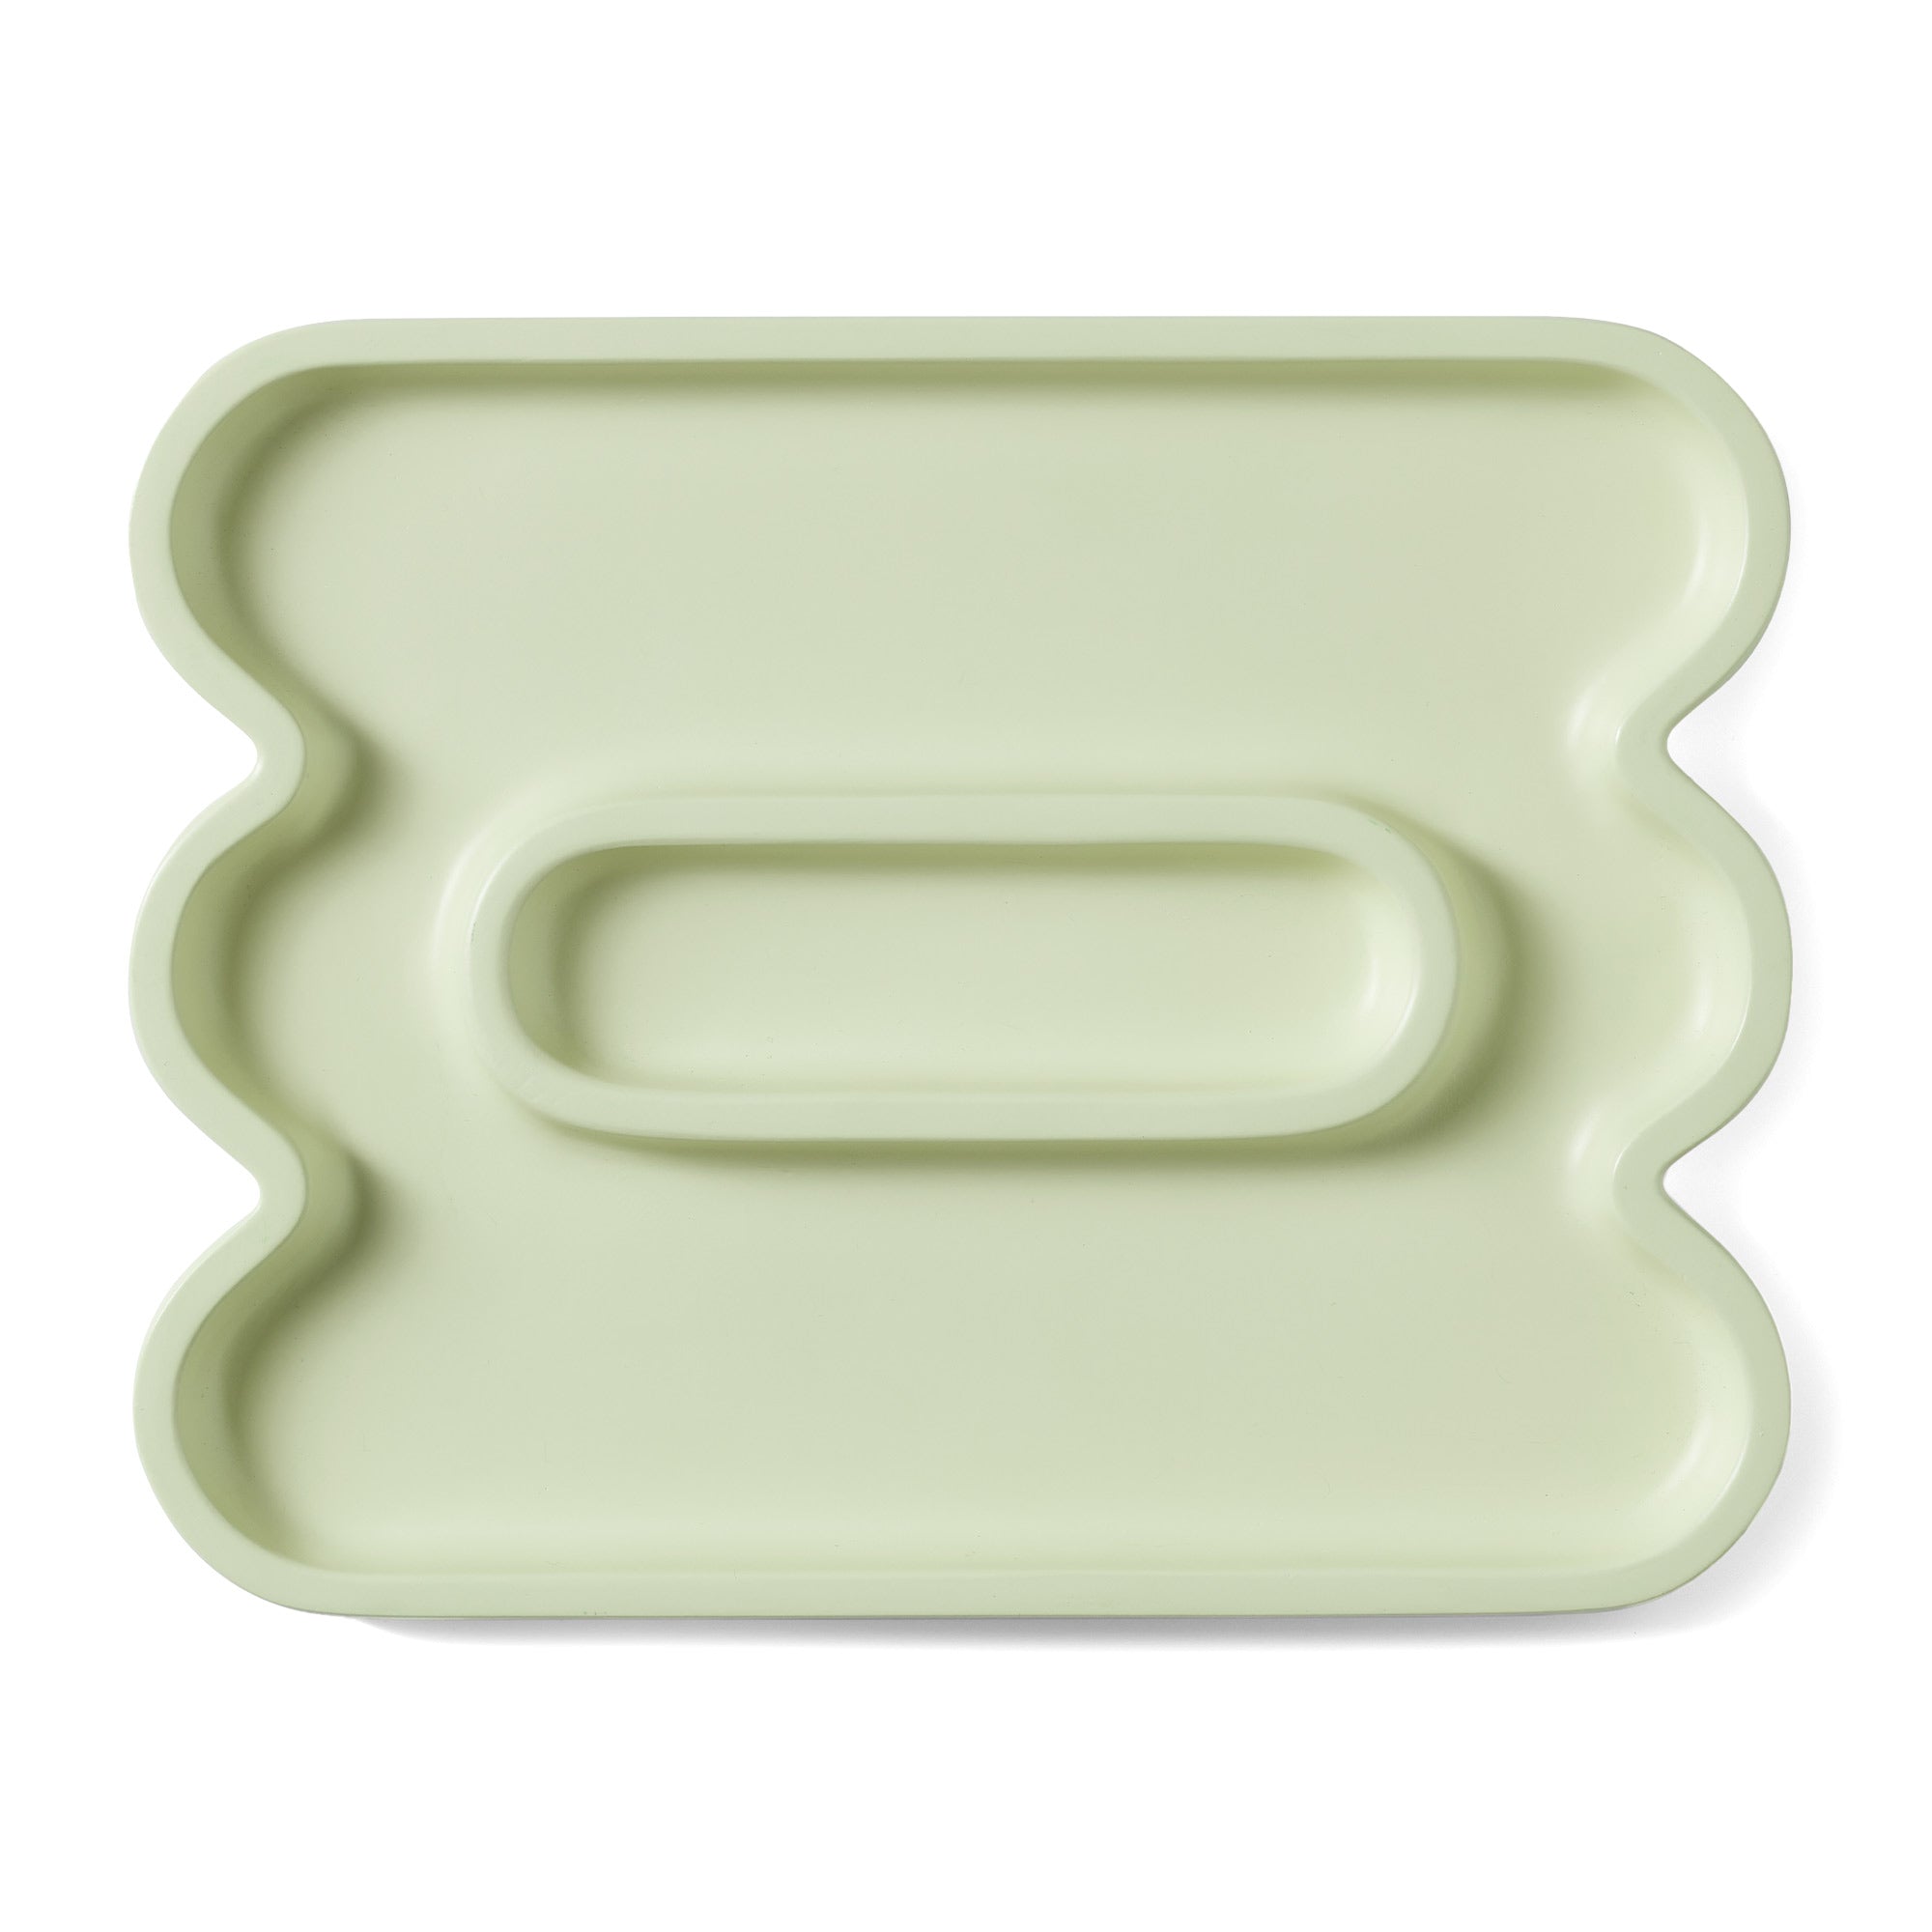 Catchall Templo Wave - Olive Green image 1